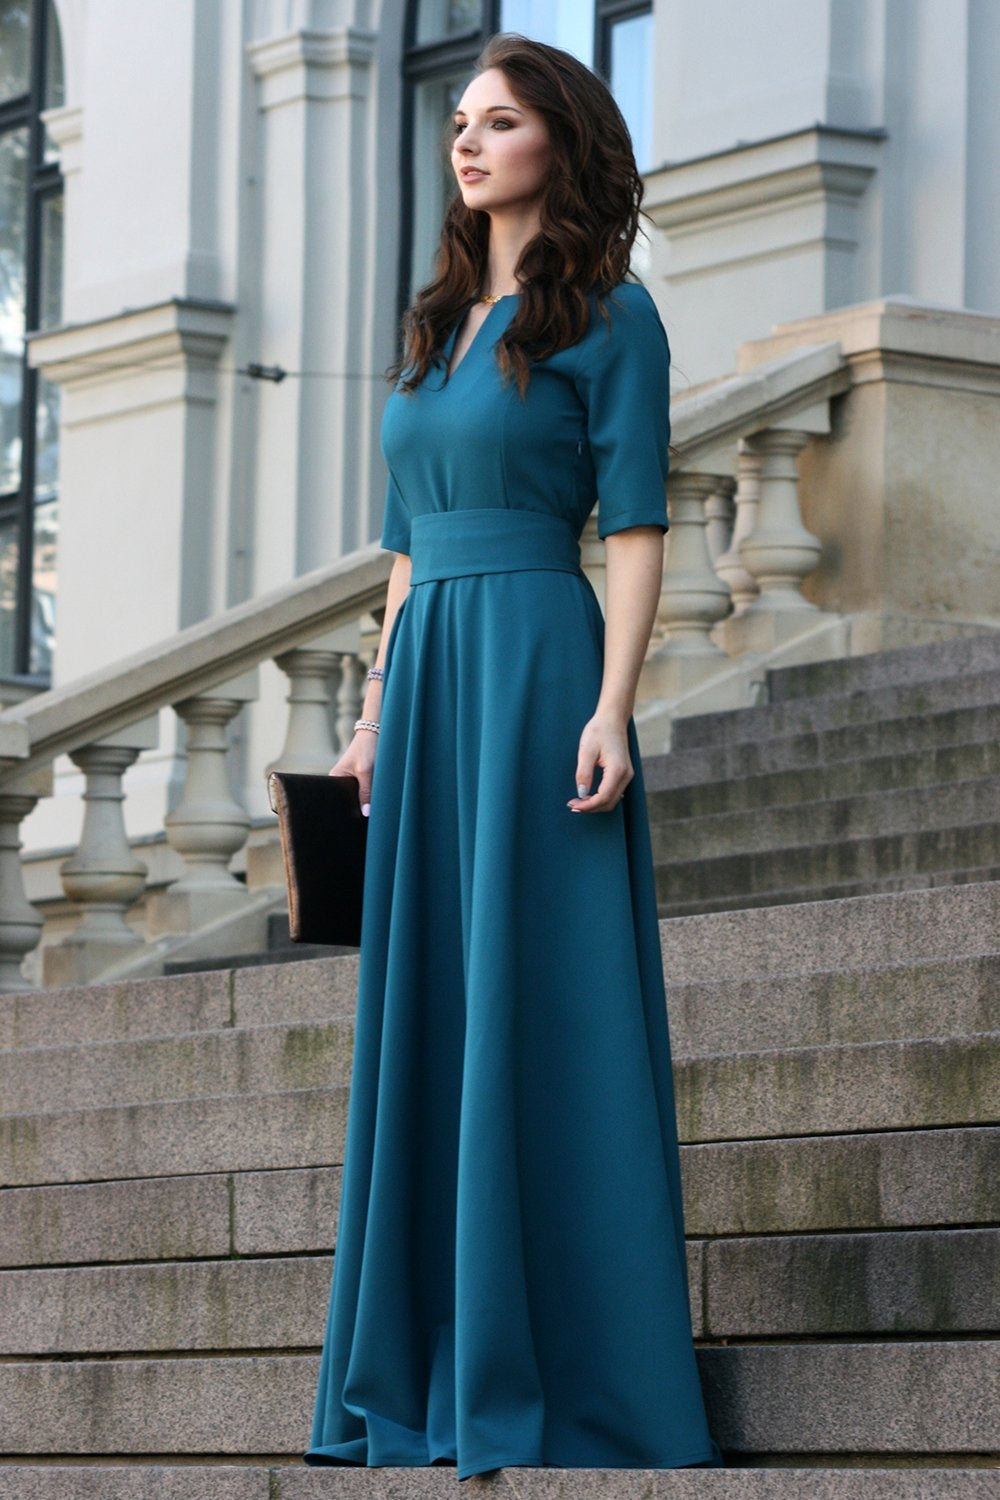 Blue green maxi dress with circle skirts. Golden color detail in neckline